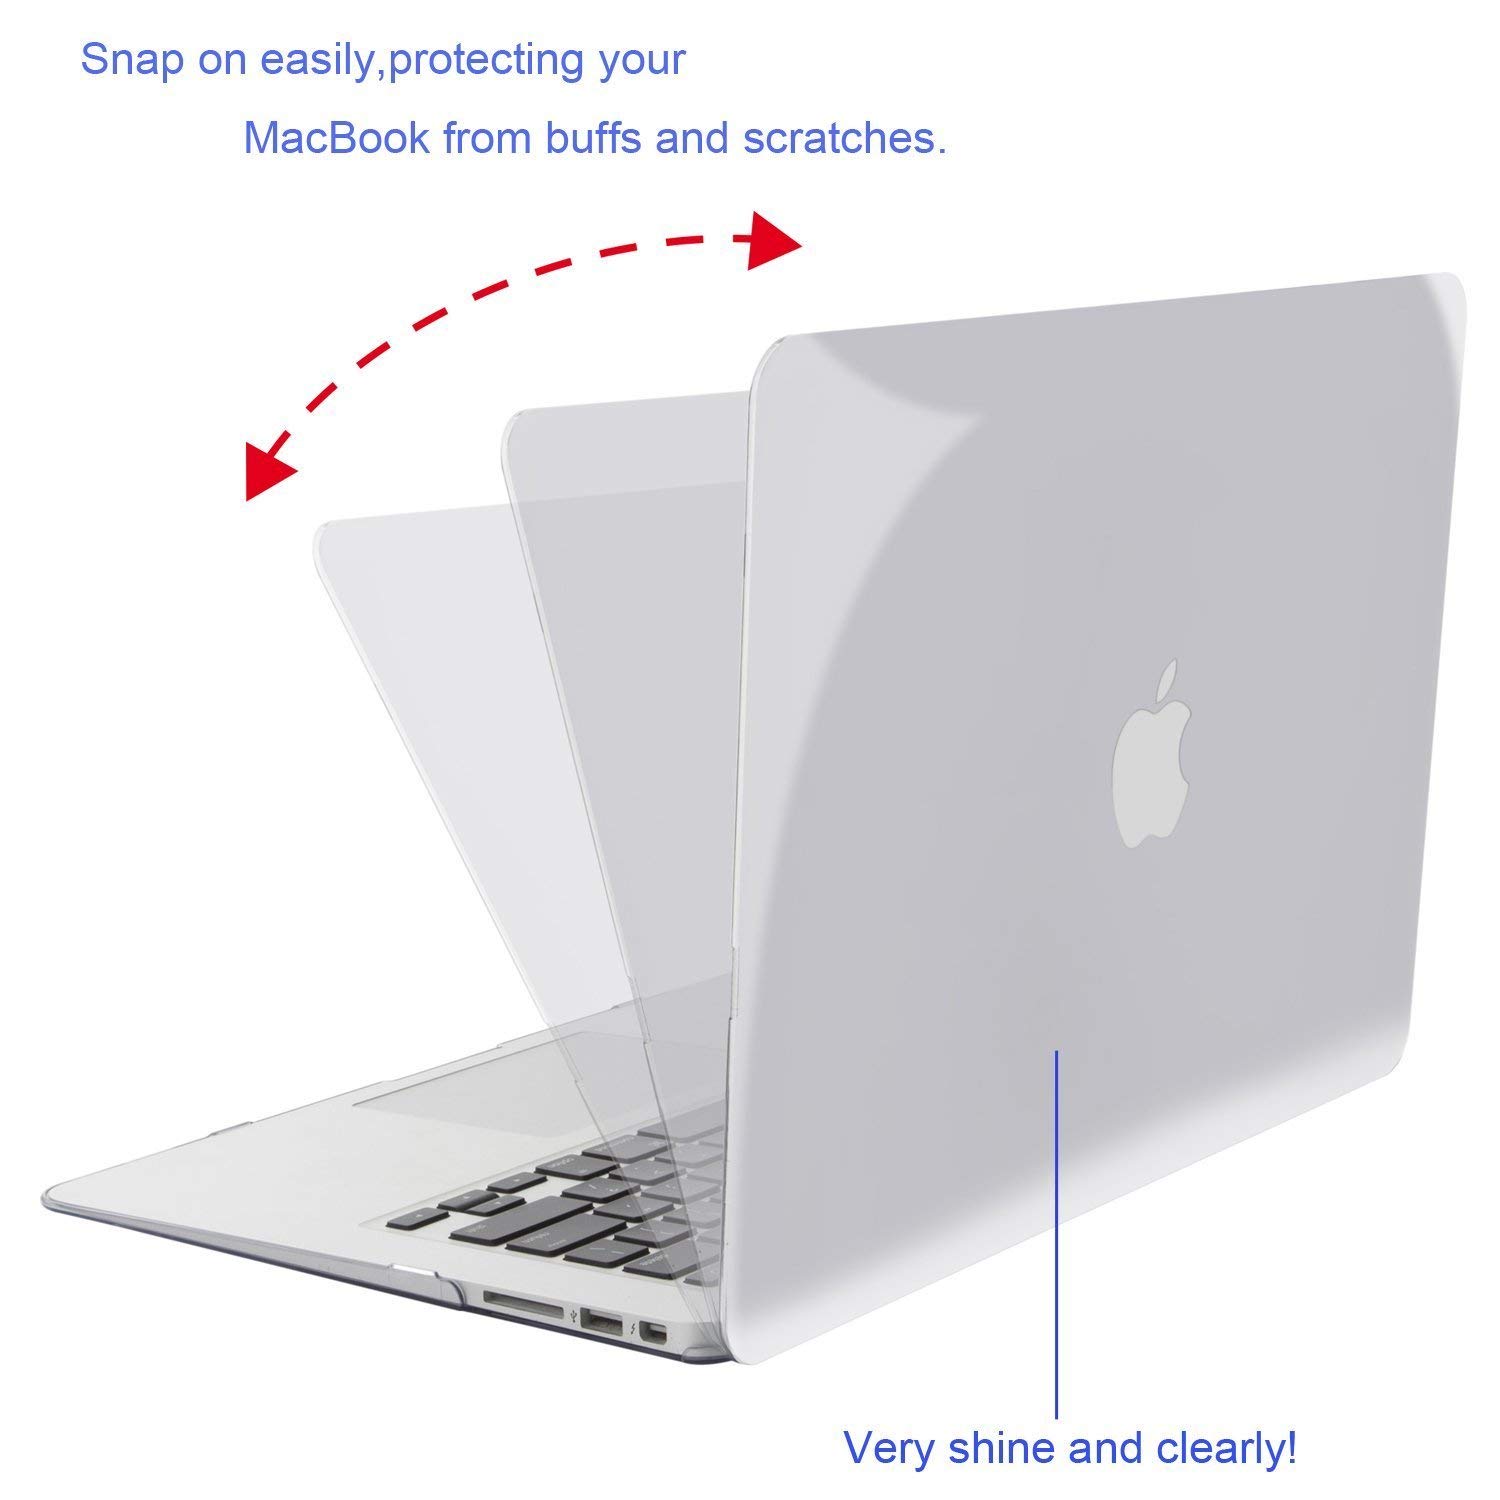 HF-MBA11-CSC: Plastic Hard Case Cover Compatible with MacBook Air 11 Inch (Models: A1370 and A1465), Crystal Clear